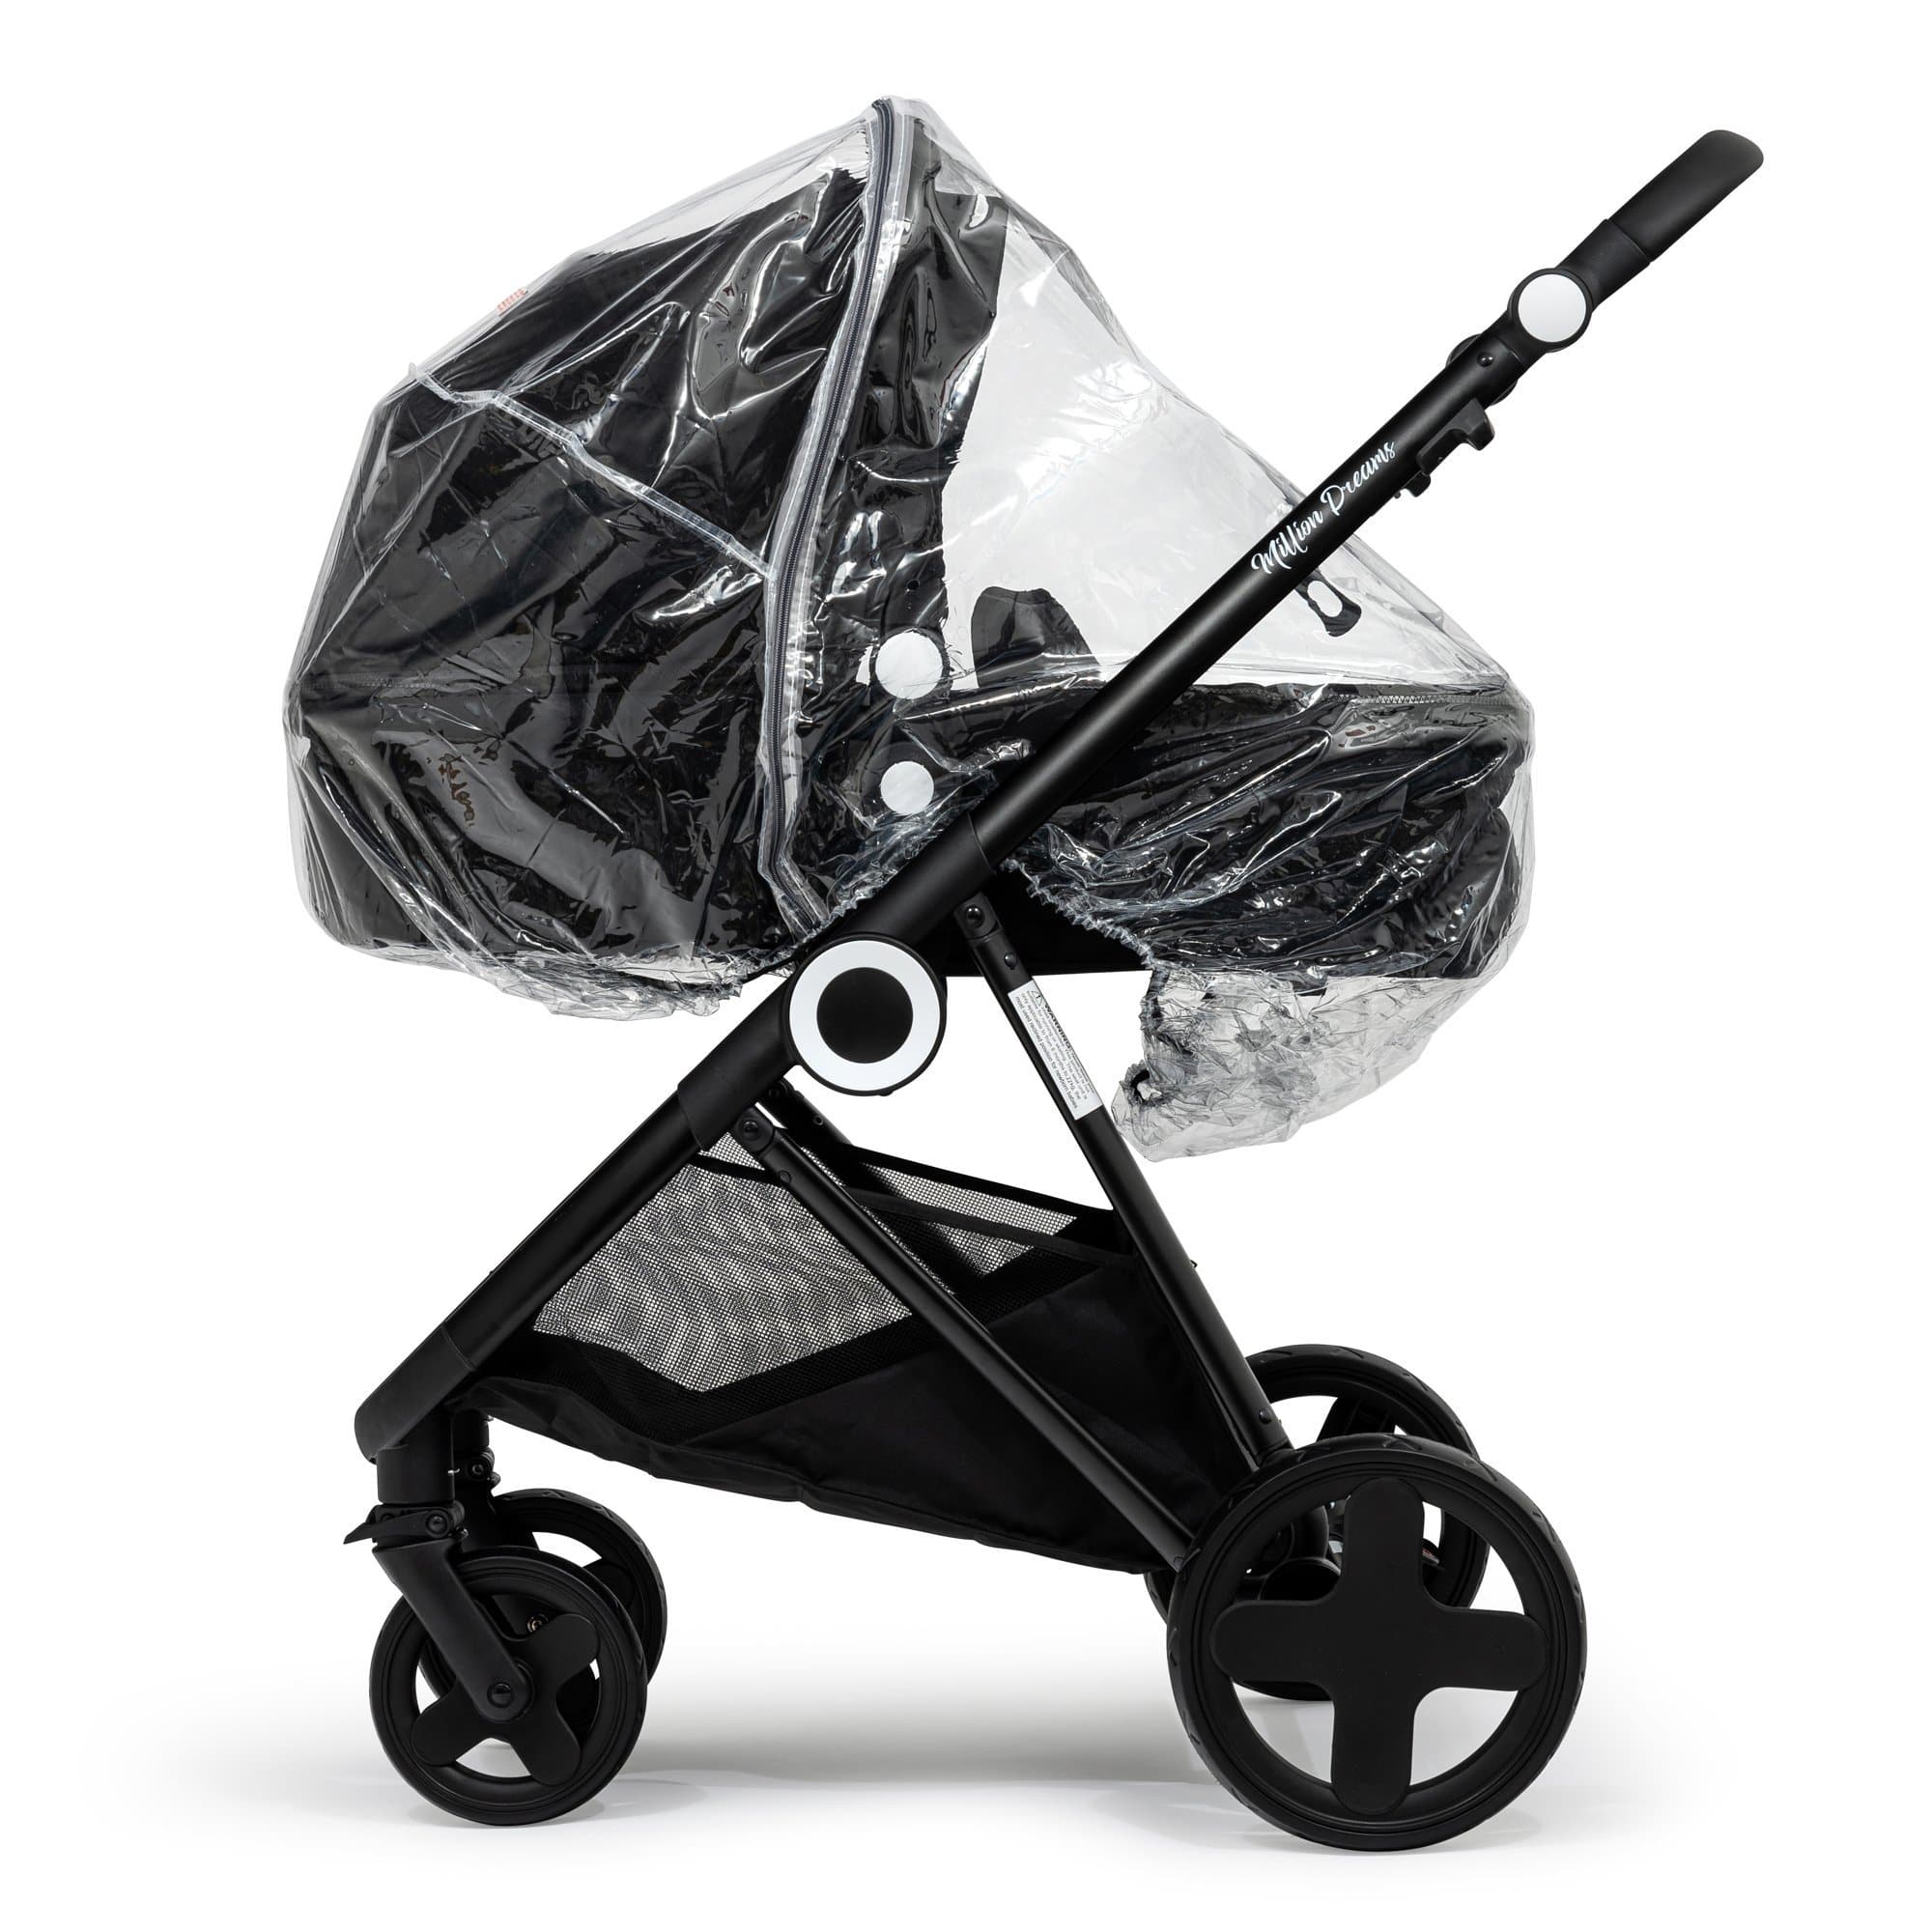 2 in 1 Rain Cover Compatible with Babylo - Fits All Models - For Your Little One